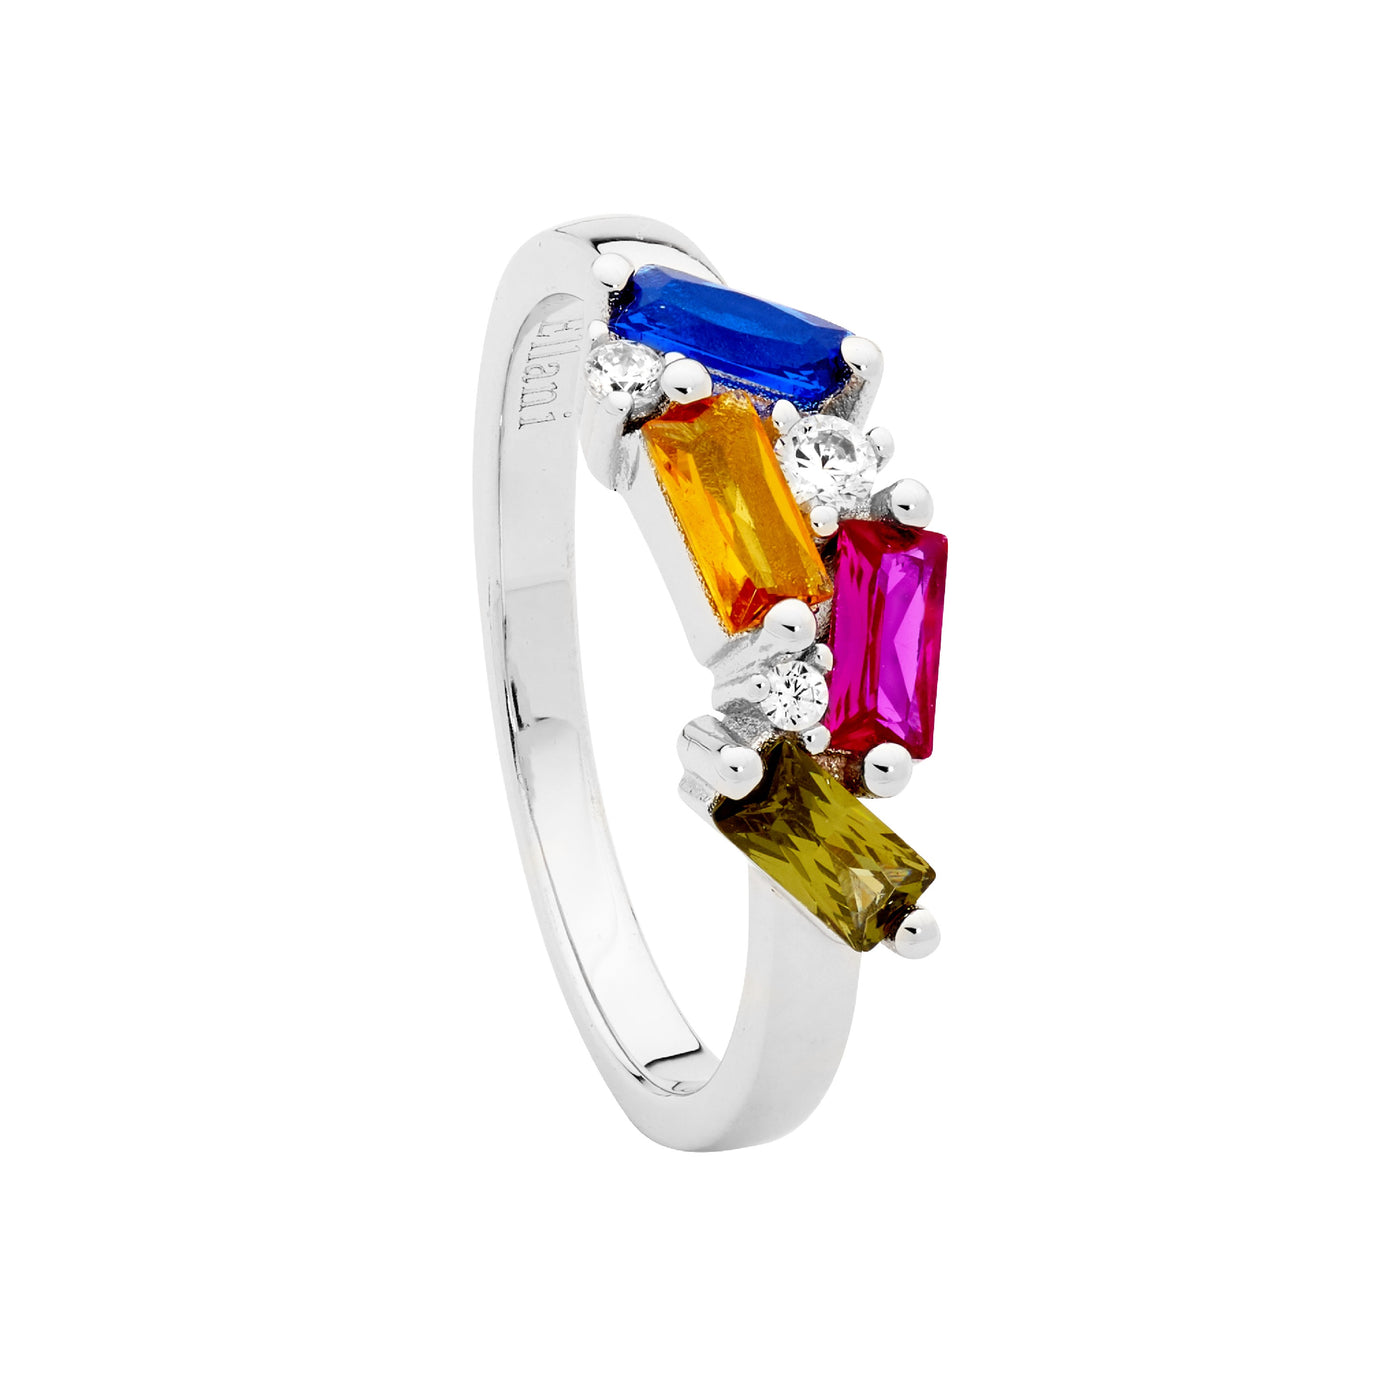 Bright Rainbow Cubic Zirconia Dress Ring - Sterling Silver.